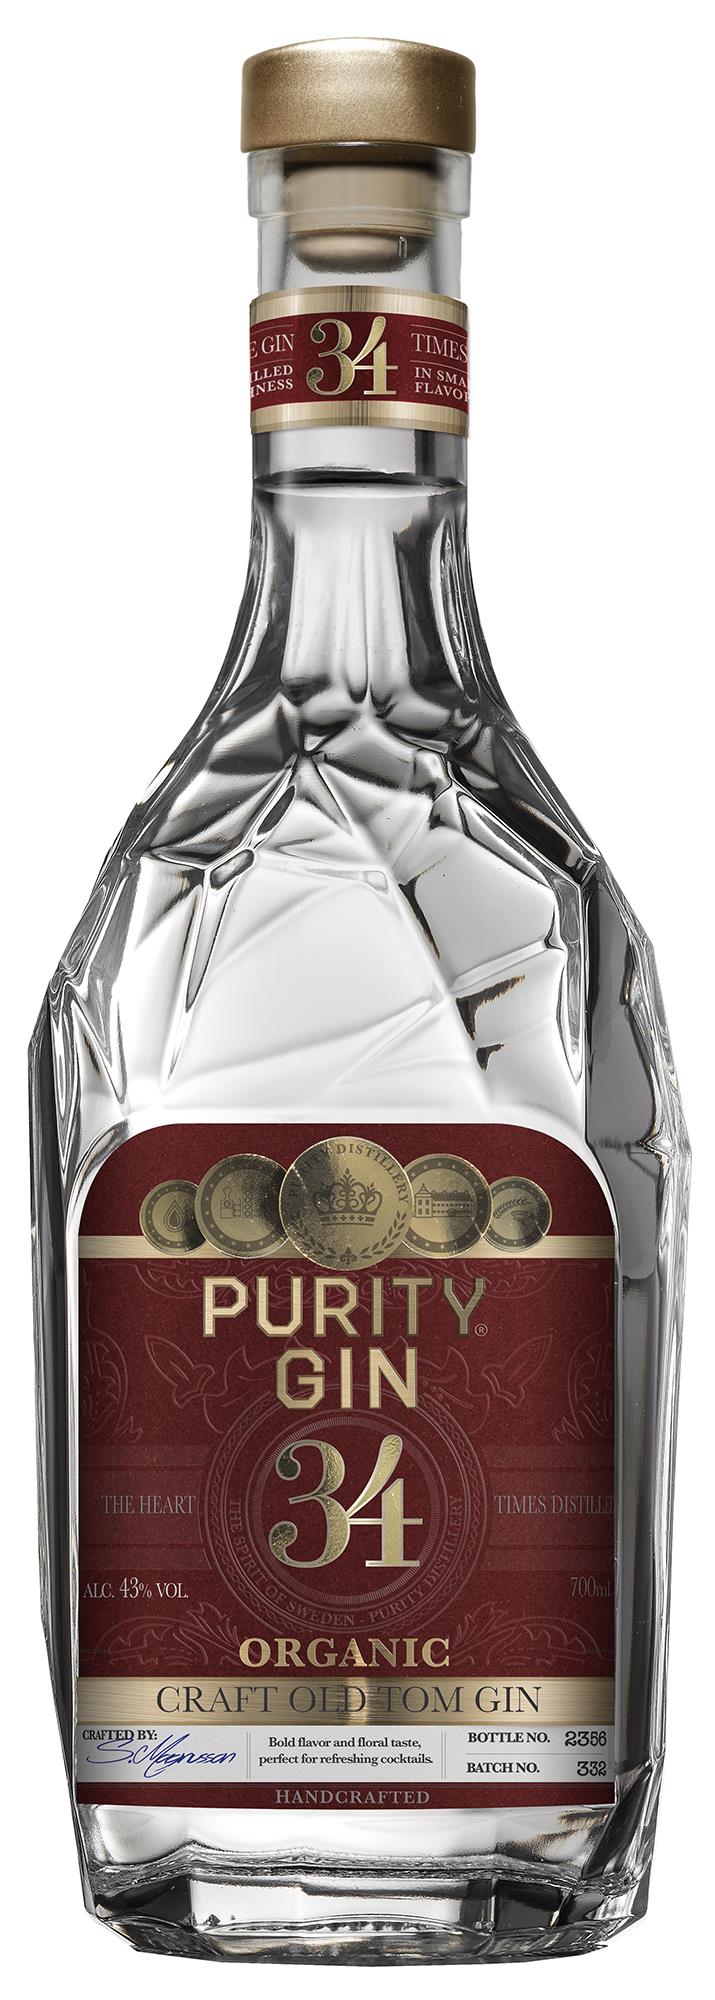 PURITY CRAFT NORDIC OLD TOM GIN 43% ØKO PURITY GIN 70CL